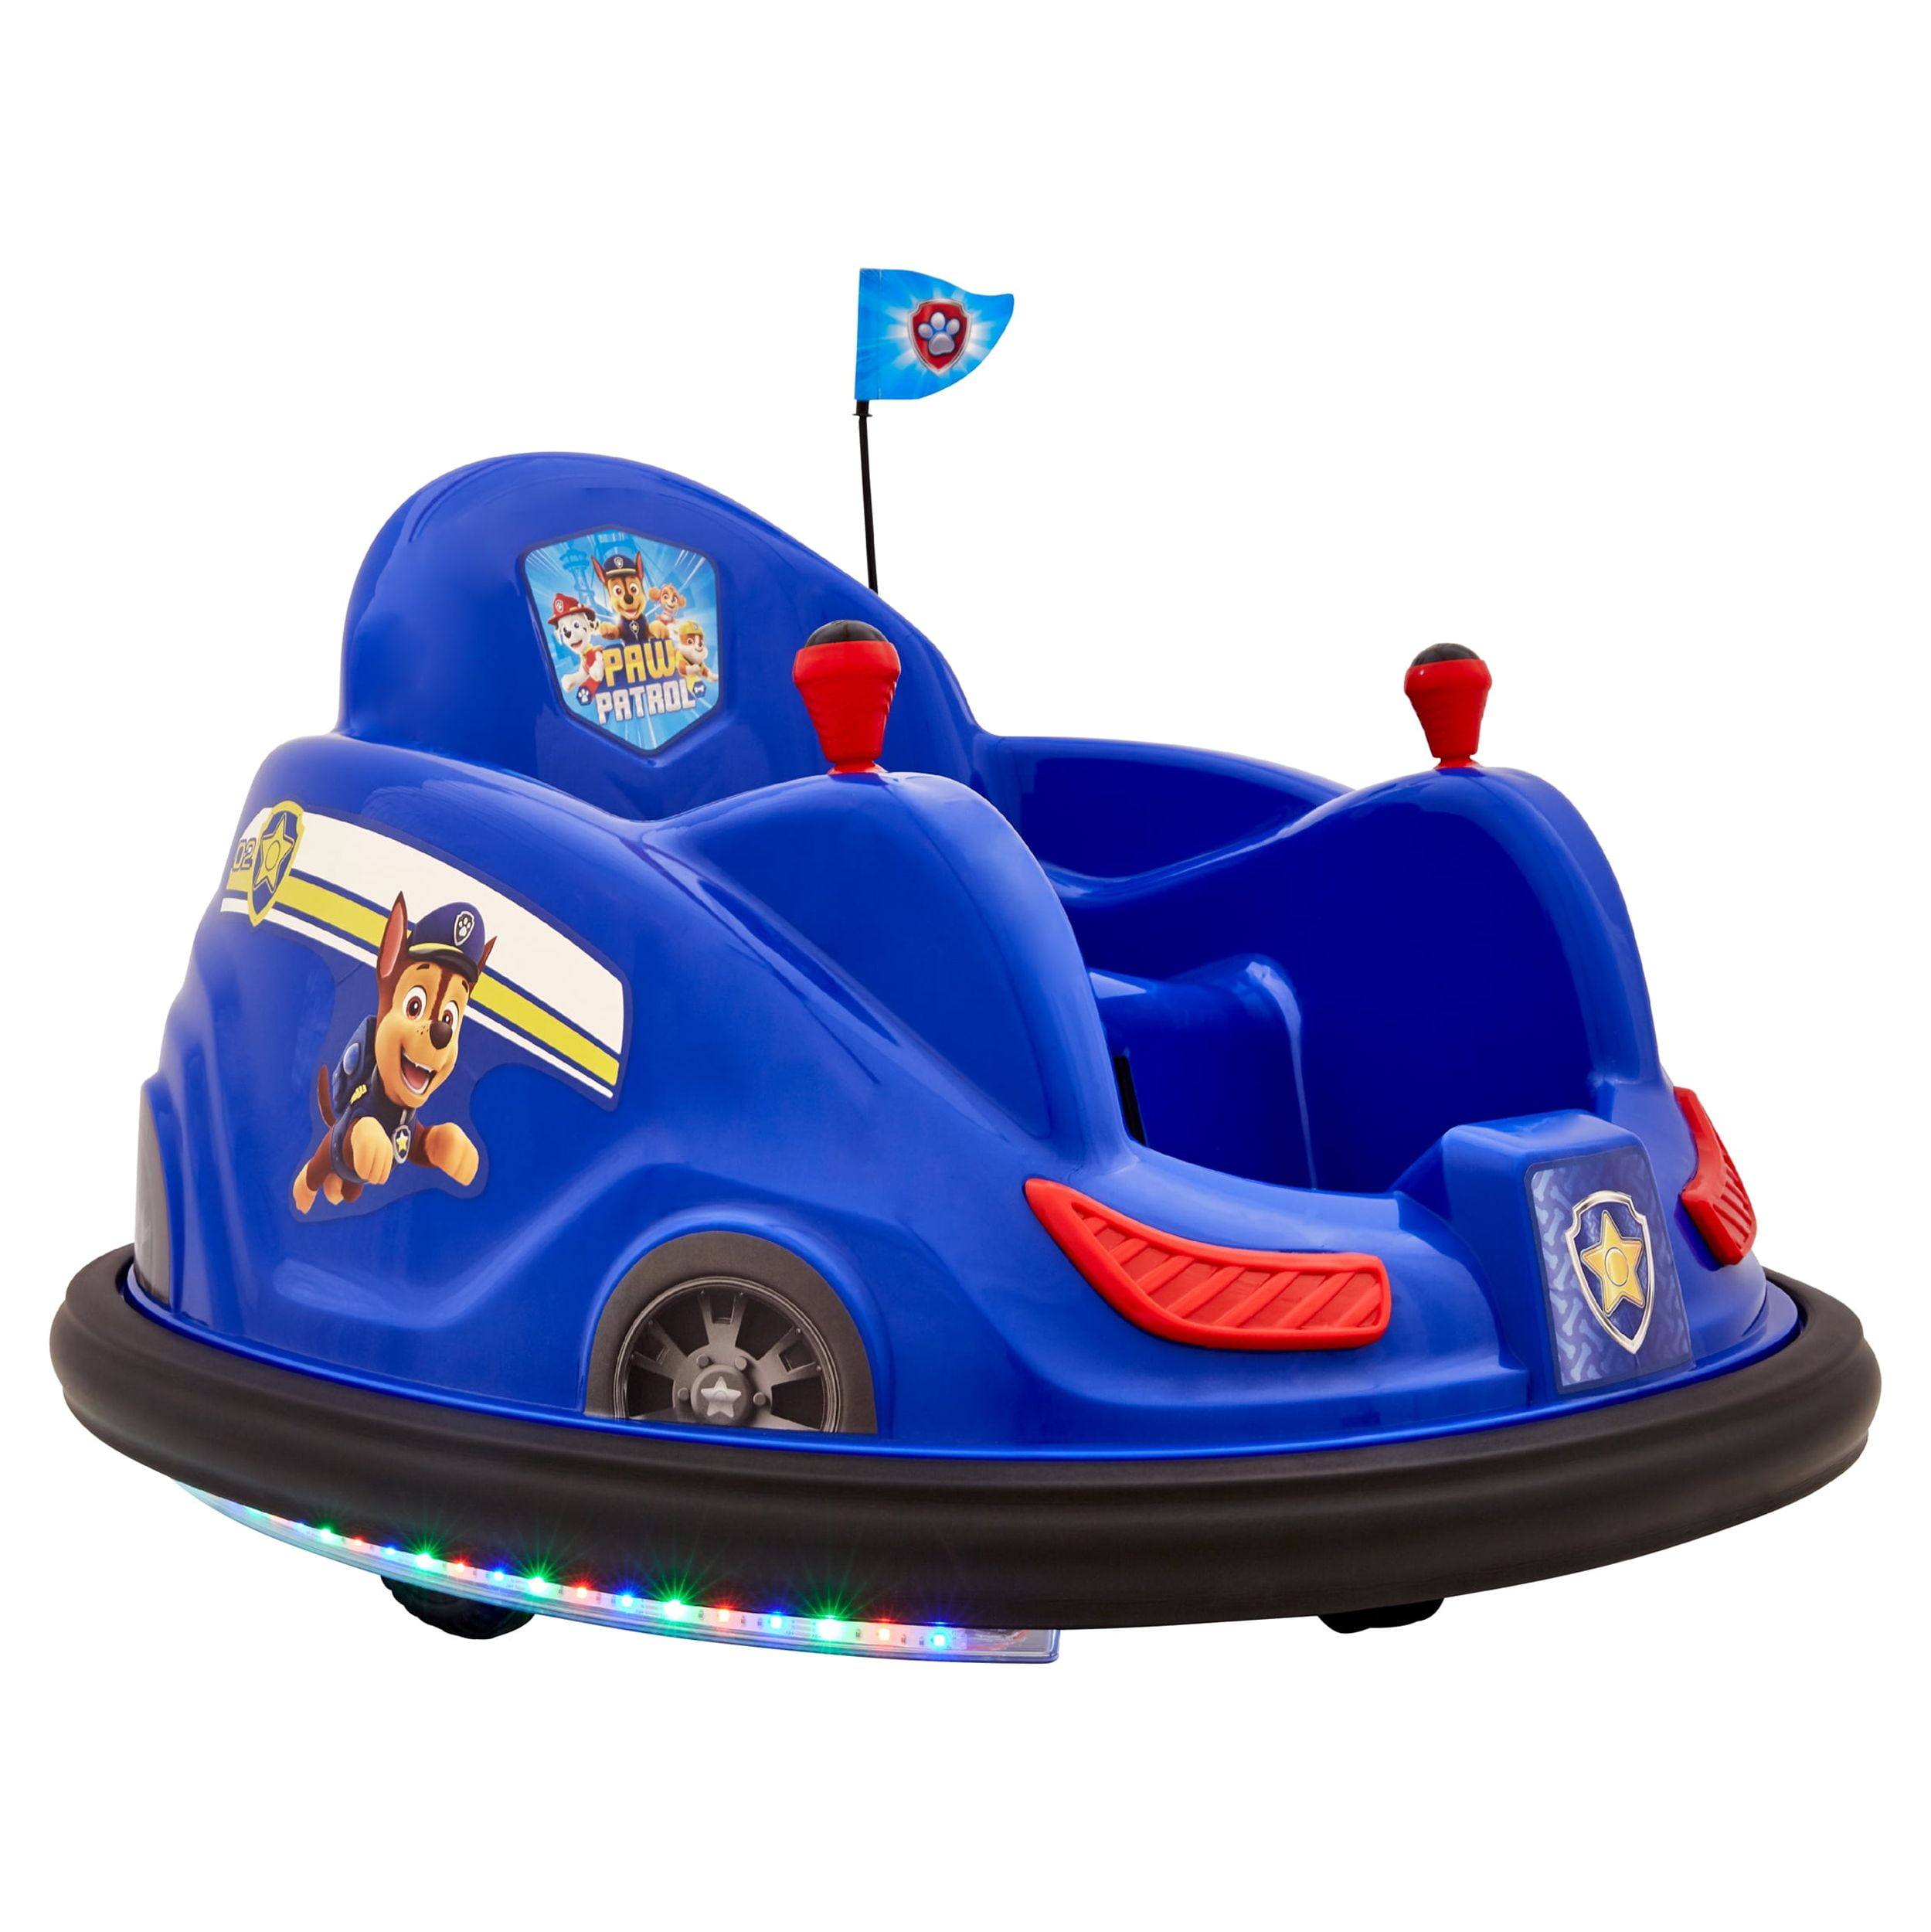 PAW Patrol 6 Volts Bumper Car, Battery Powered Ride on, Fun LED Lights  Includes, Charger, Ages 1.5 - 4 Years, for Boys and Girls 